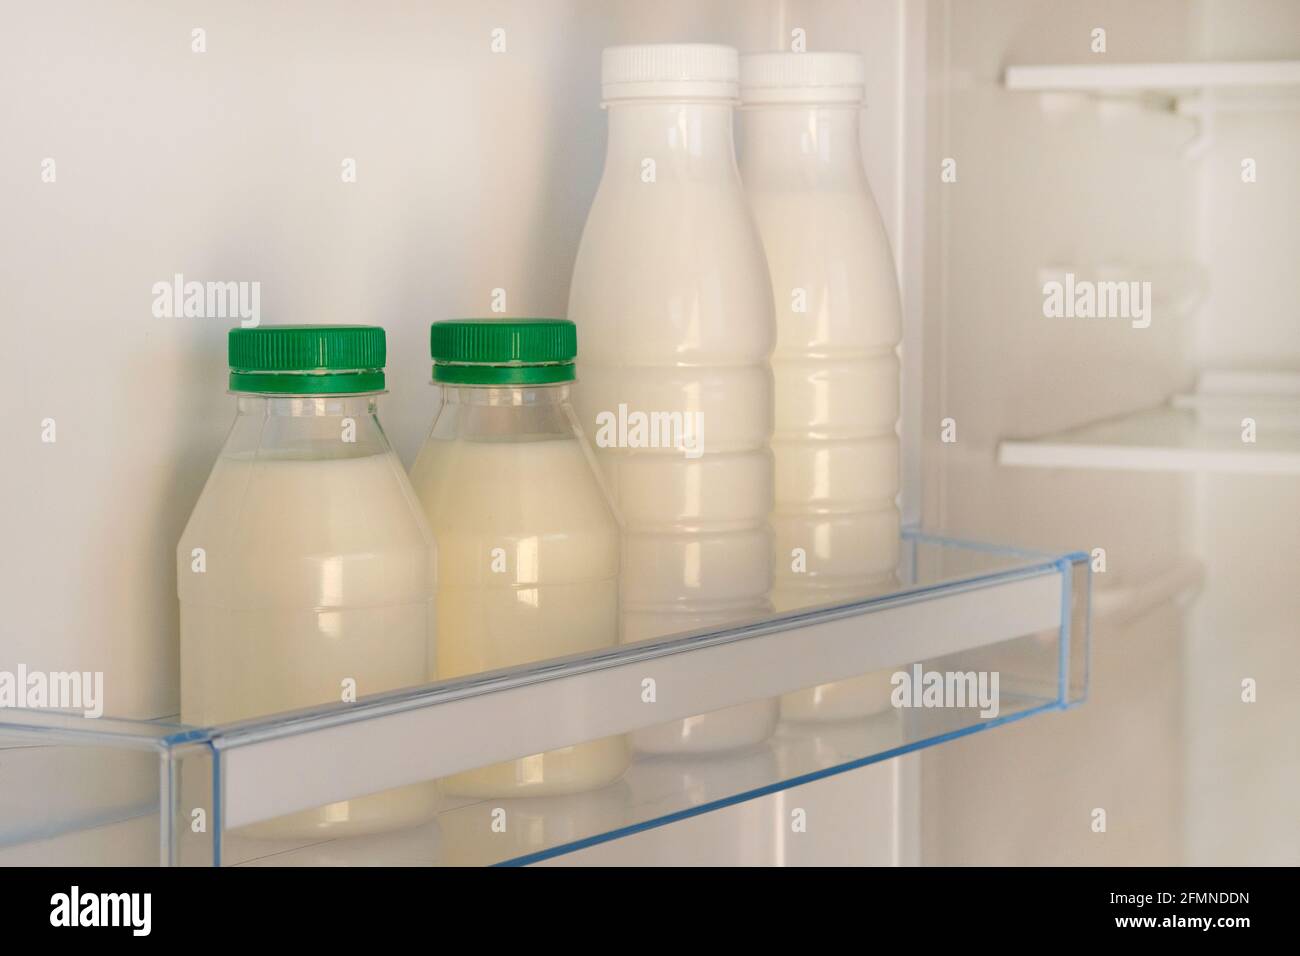 White bottles with green lid of yoghurt on shelf of open empty fridge. Weight loss diet concept. Fermented food. Stock Photo